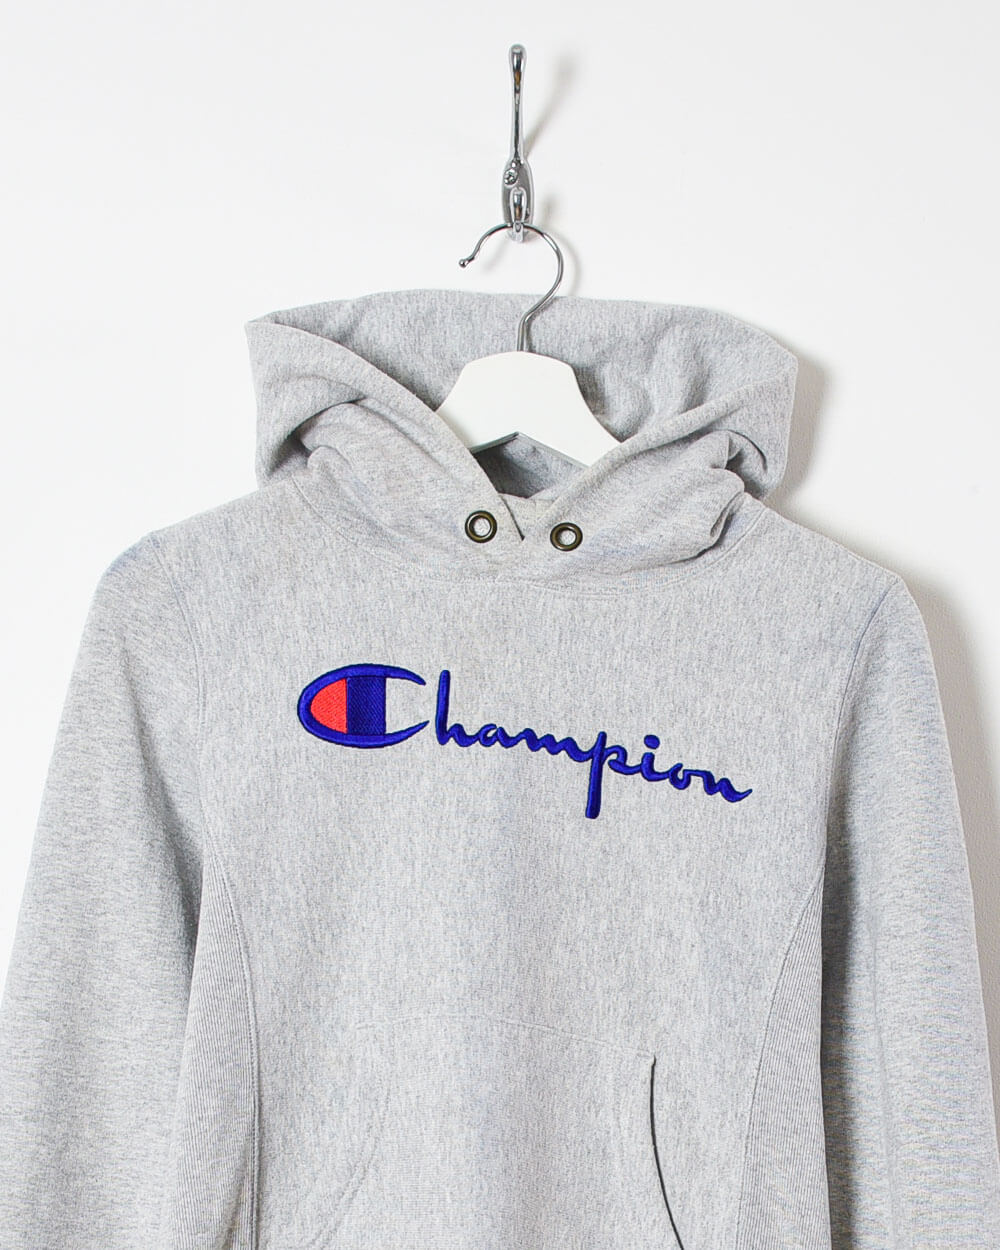 Champion Reverse Weave Hoodie - X-Small - Domno Vintage 90s, 80s, 00s Retro and Vintage Clothing 